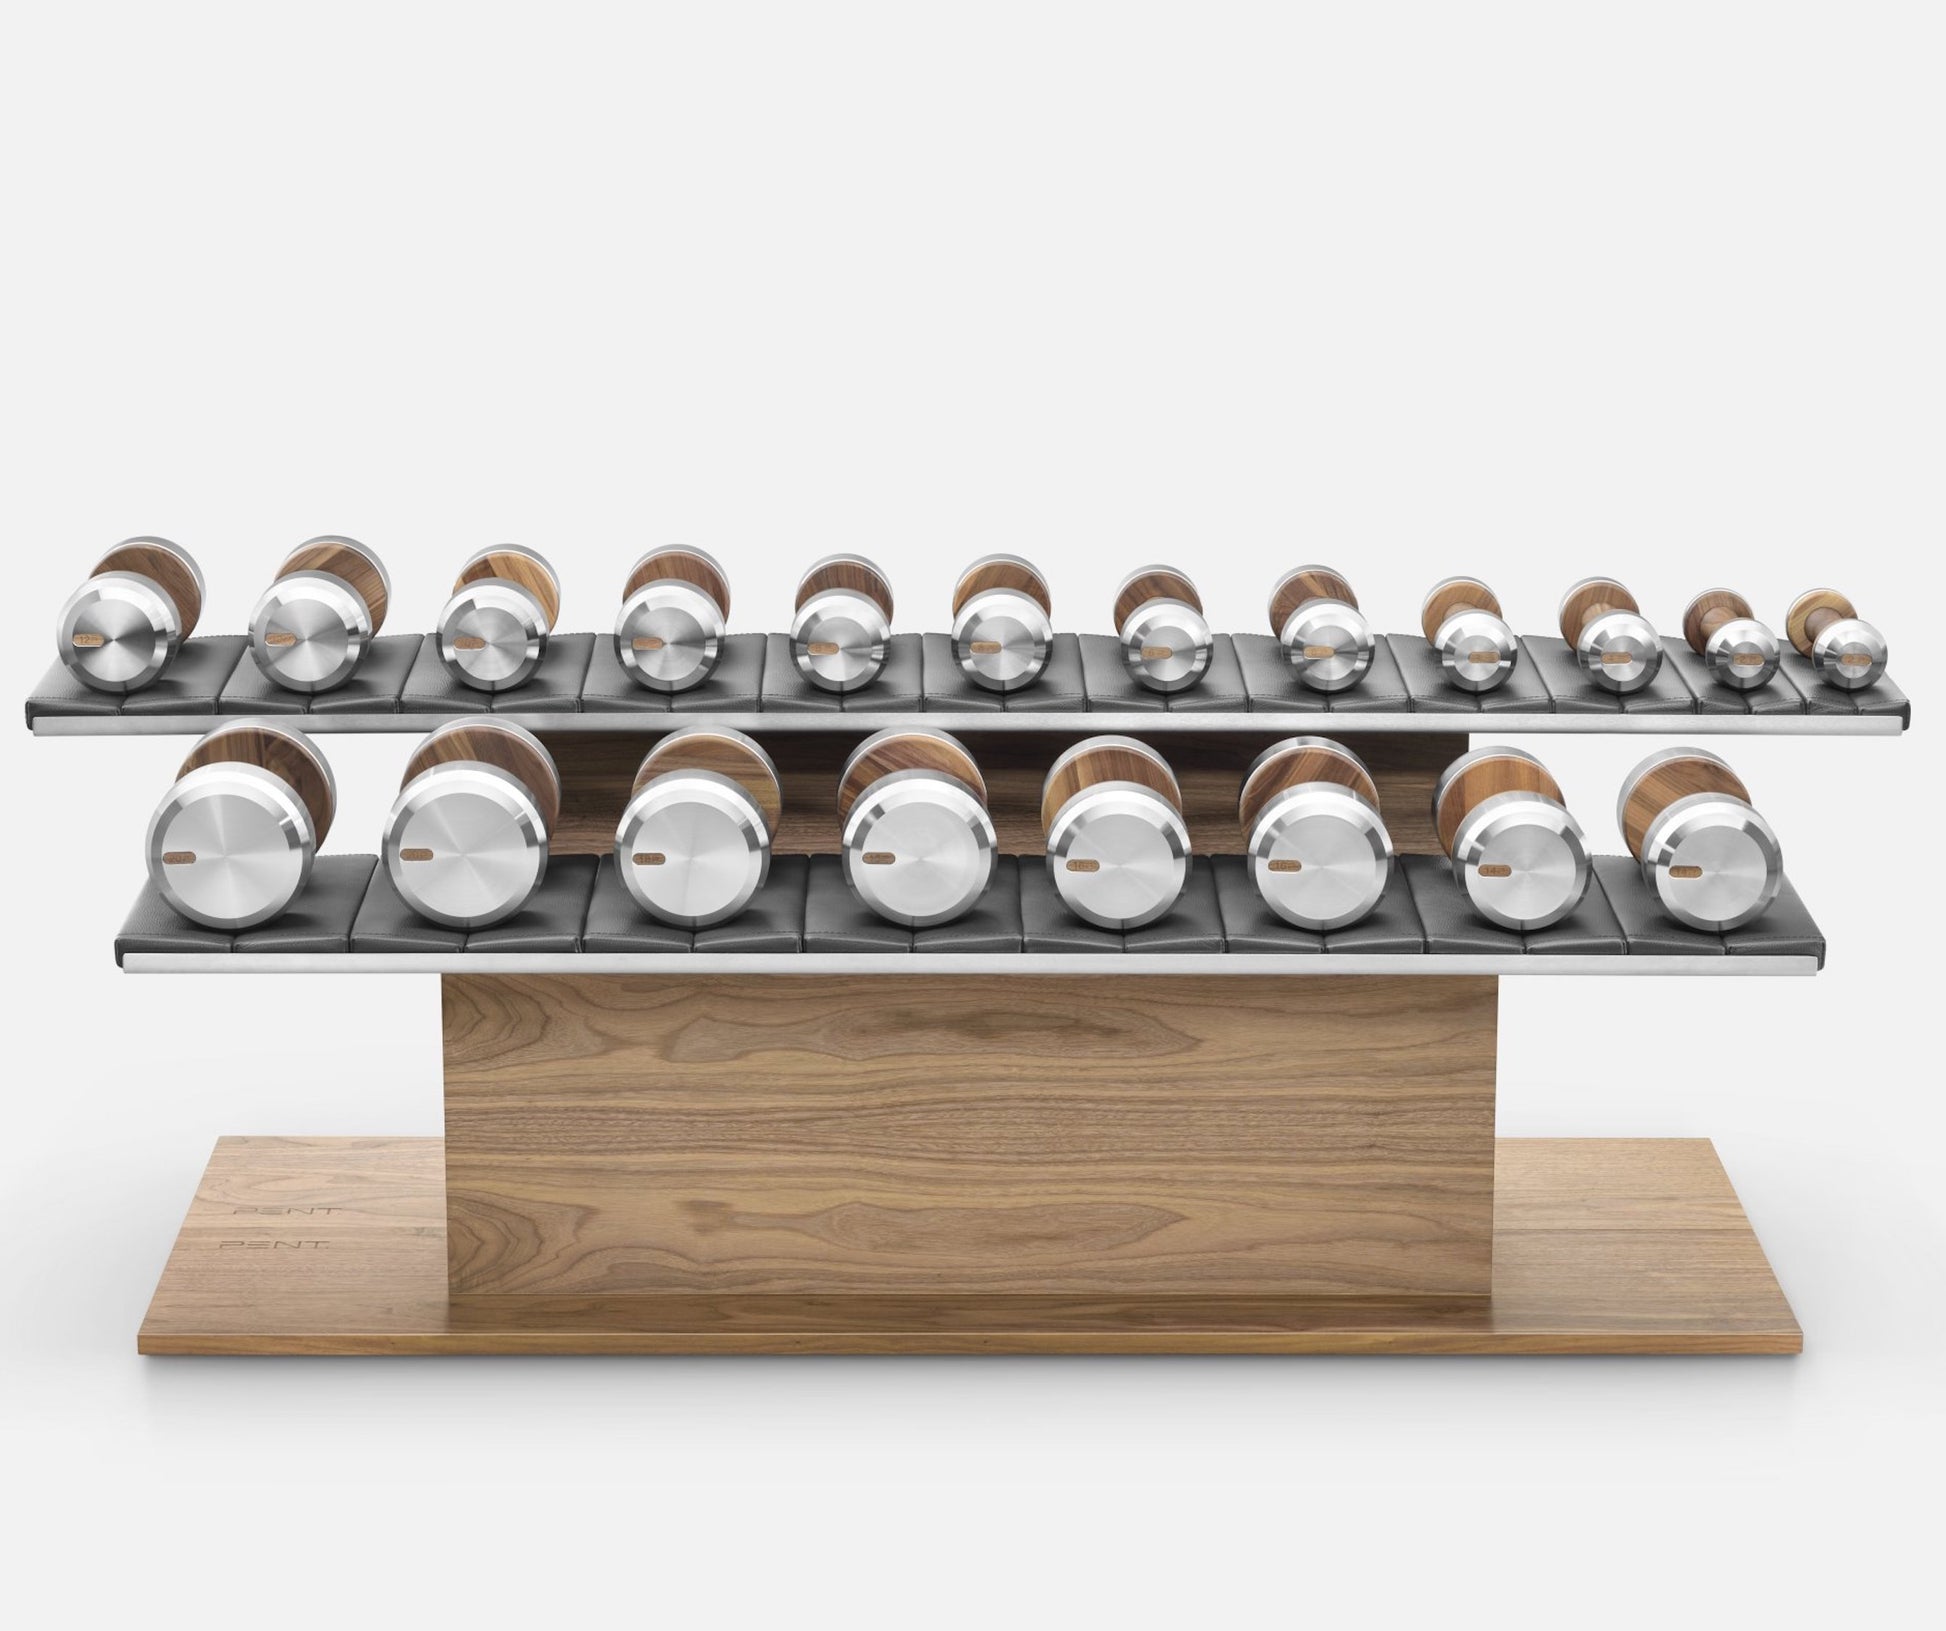 PENT Colmia Luxury Dumbbell Horizontal Set, featuring customisable options in various weight ranges, wood types, and leather combinations.